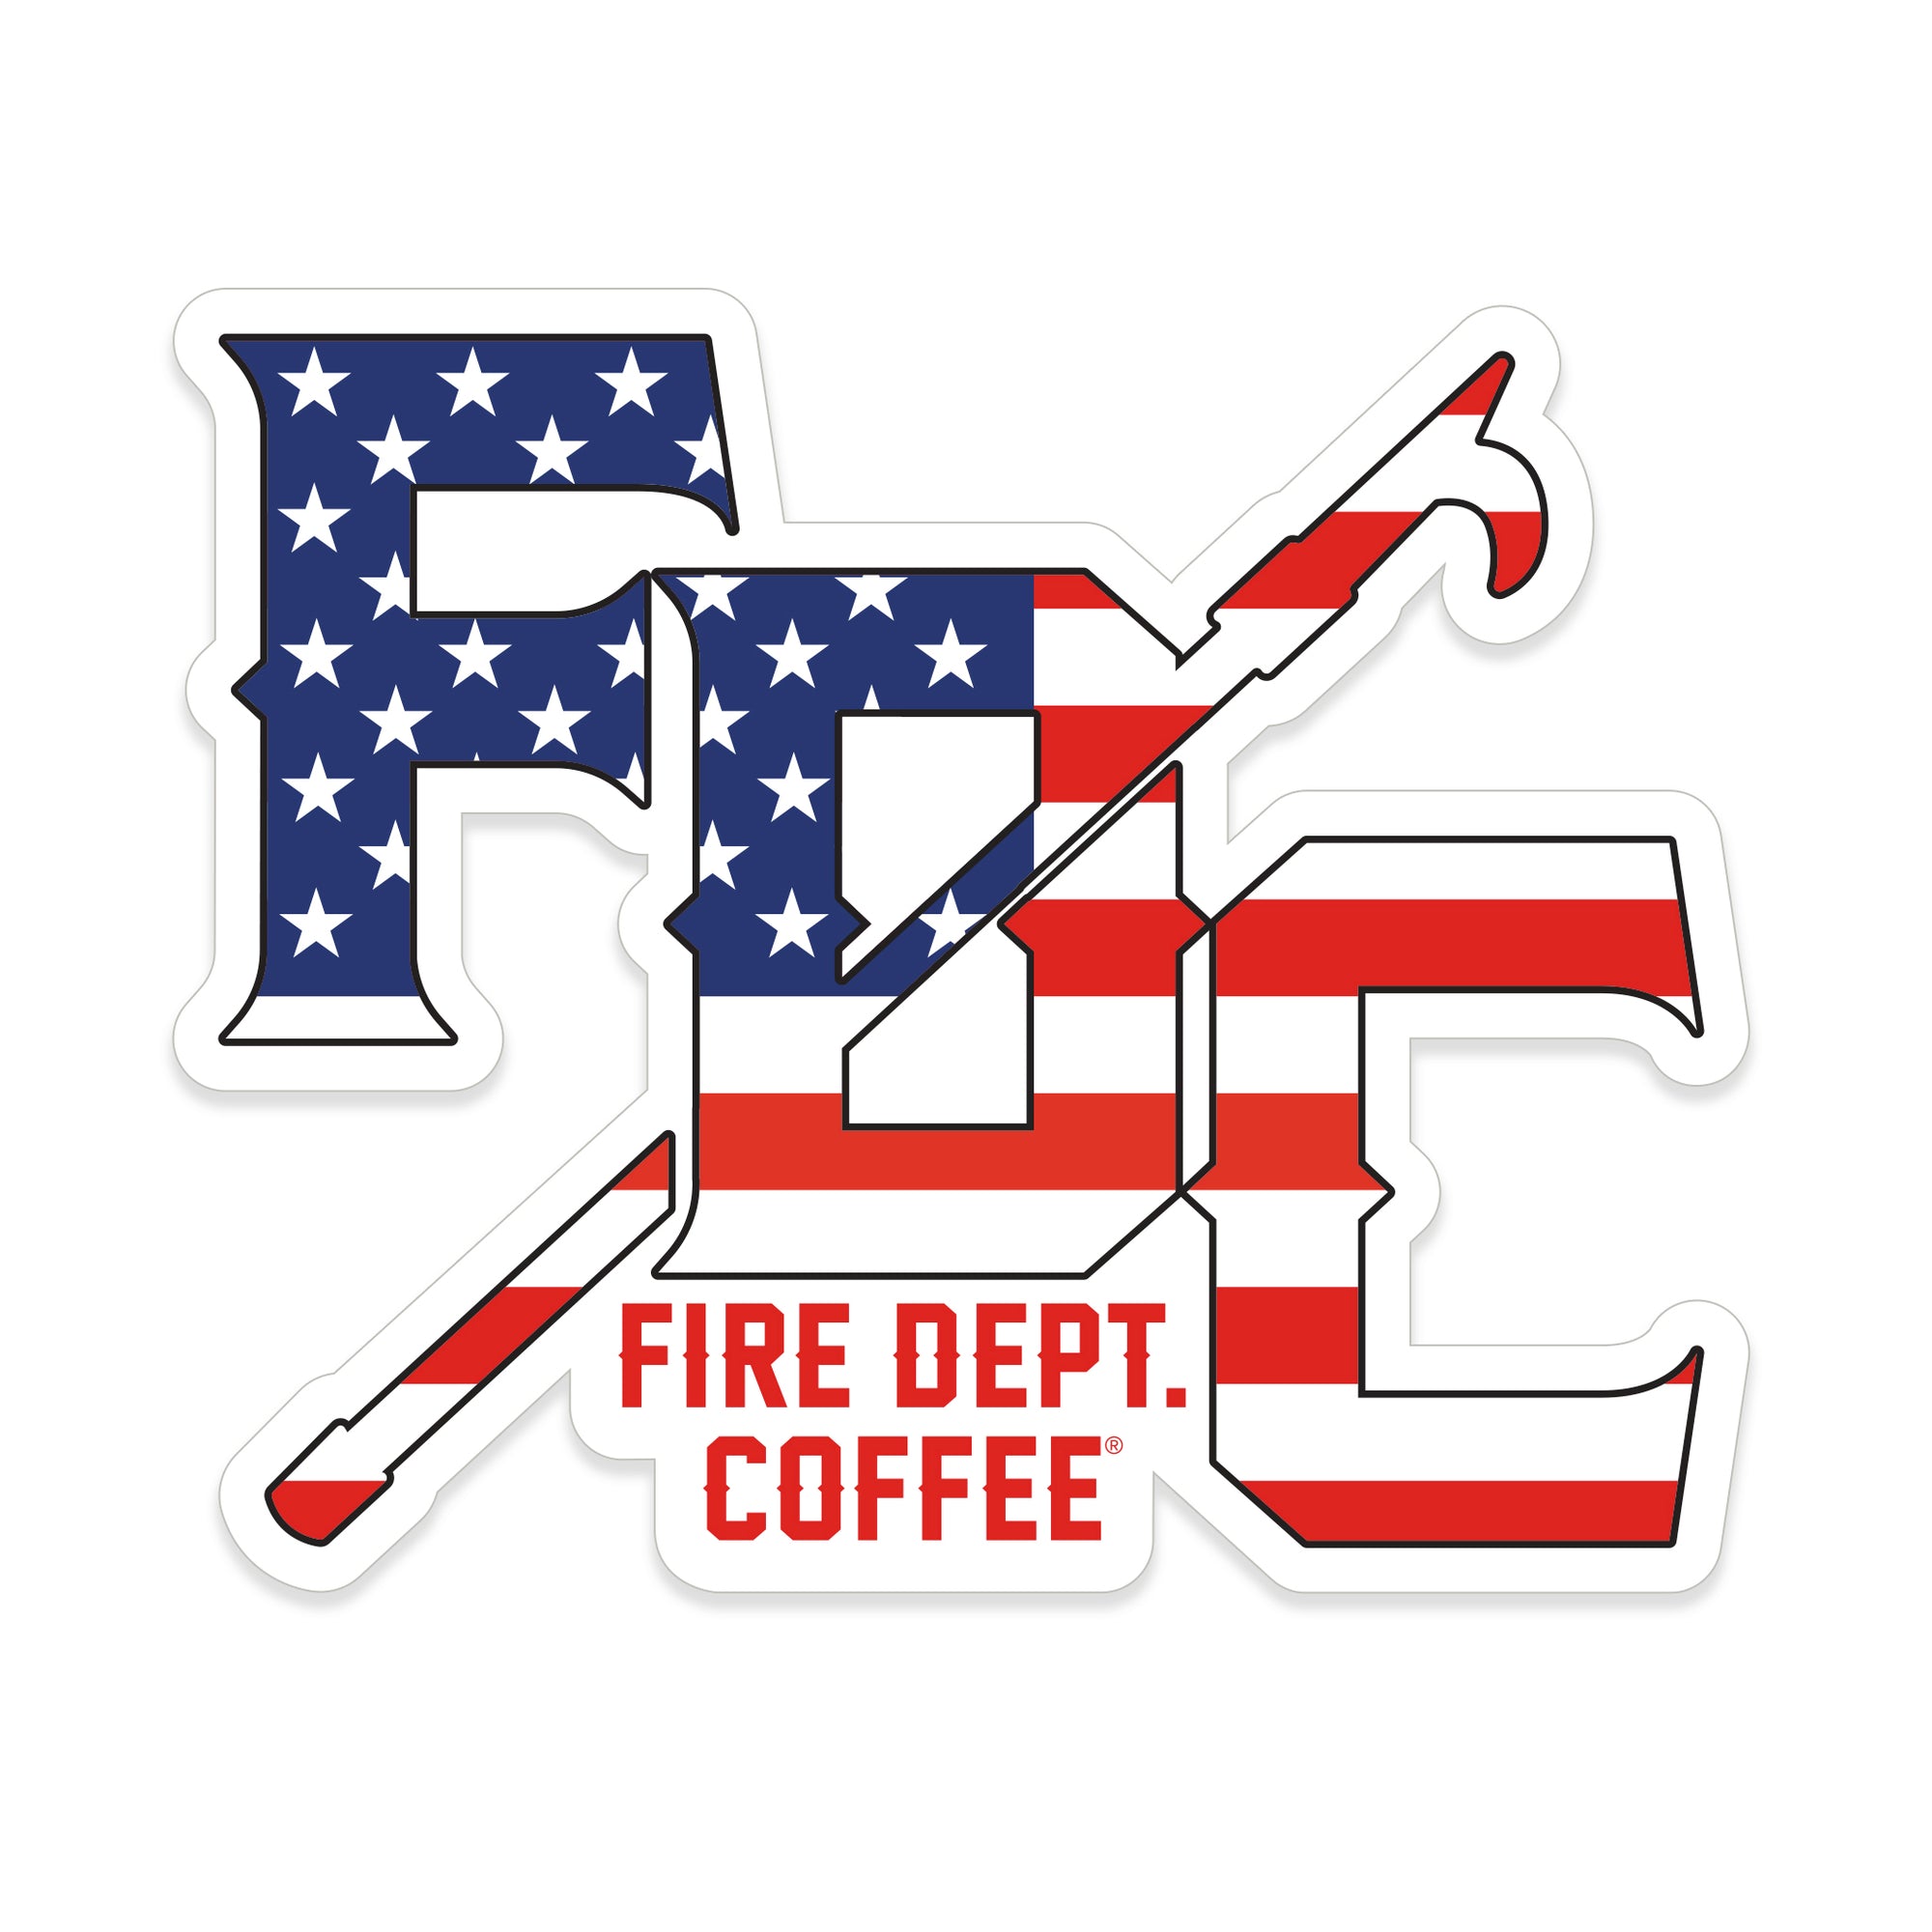 The FDC pike pole logo with an American flag background design